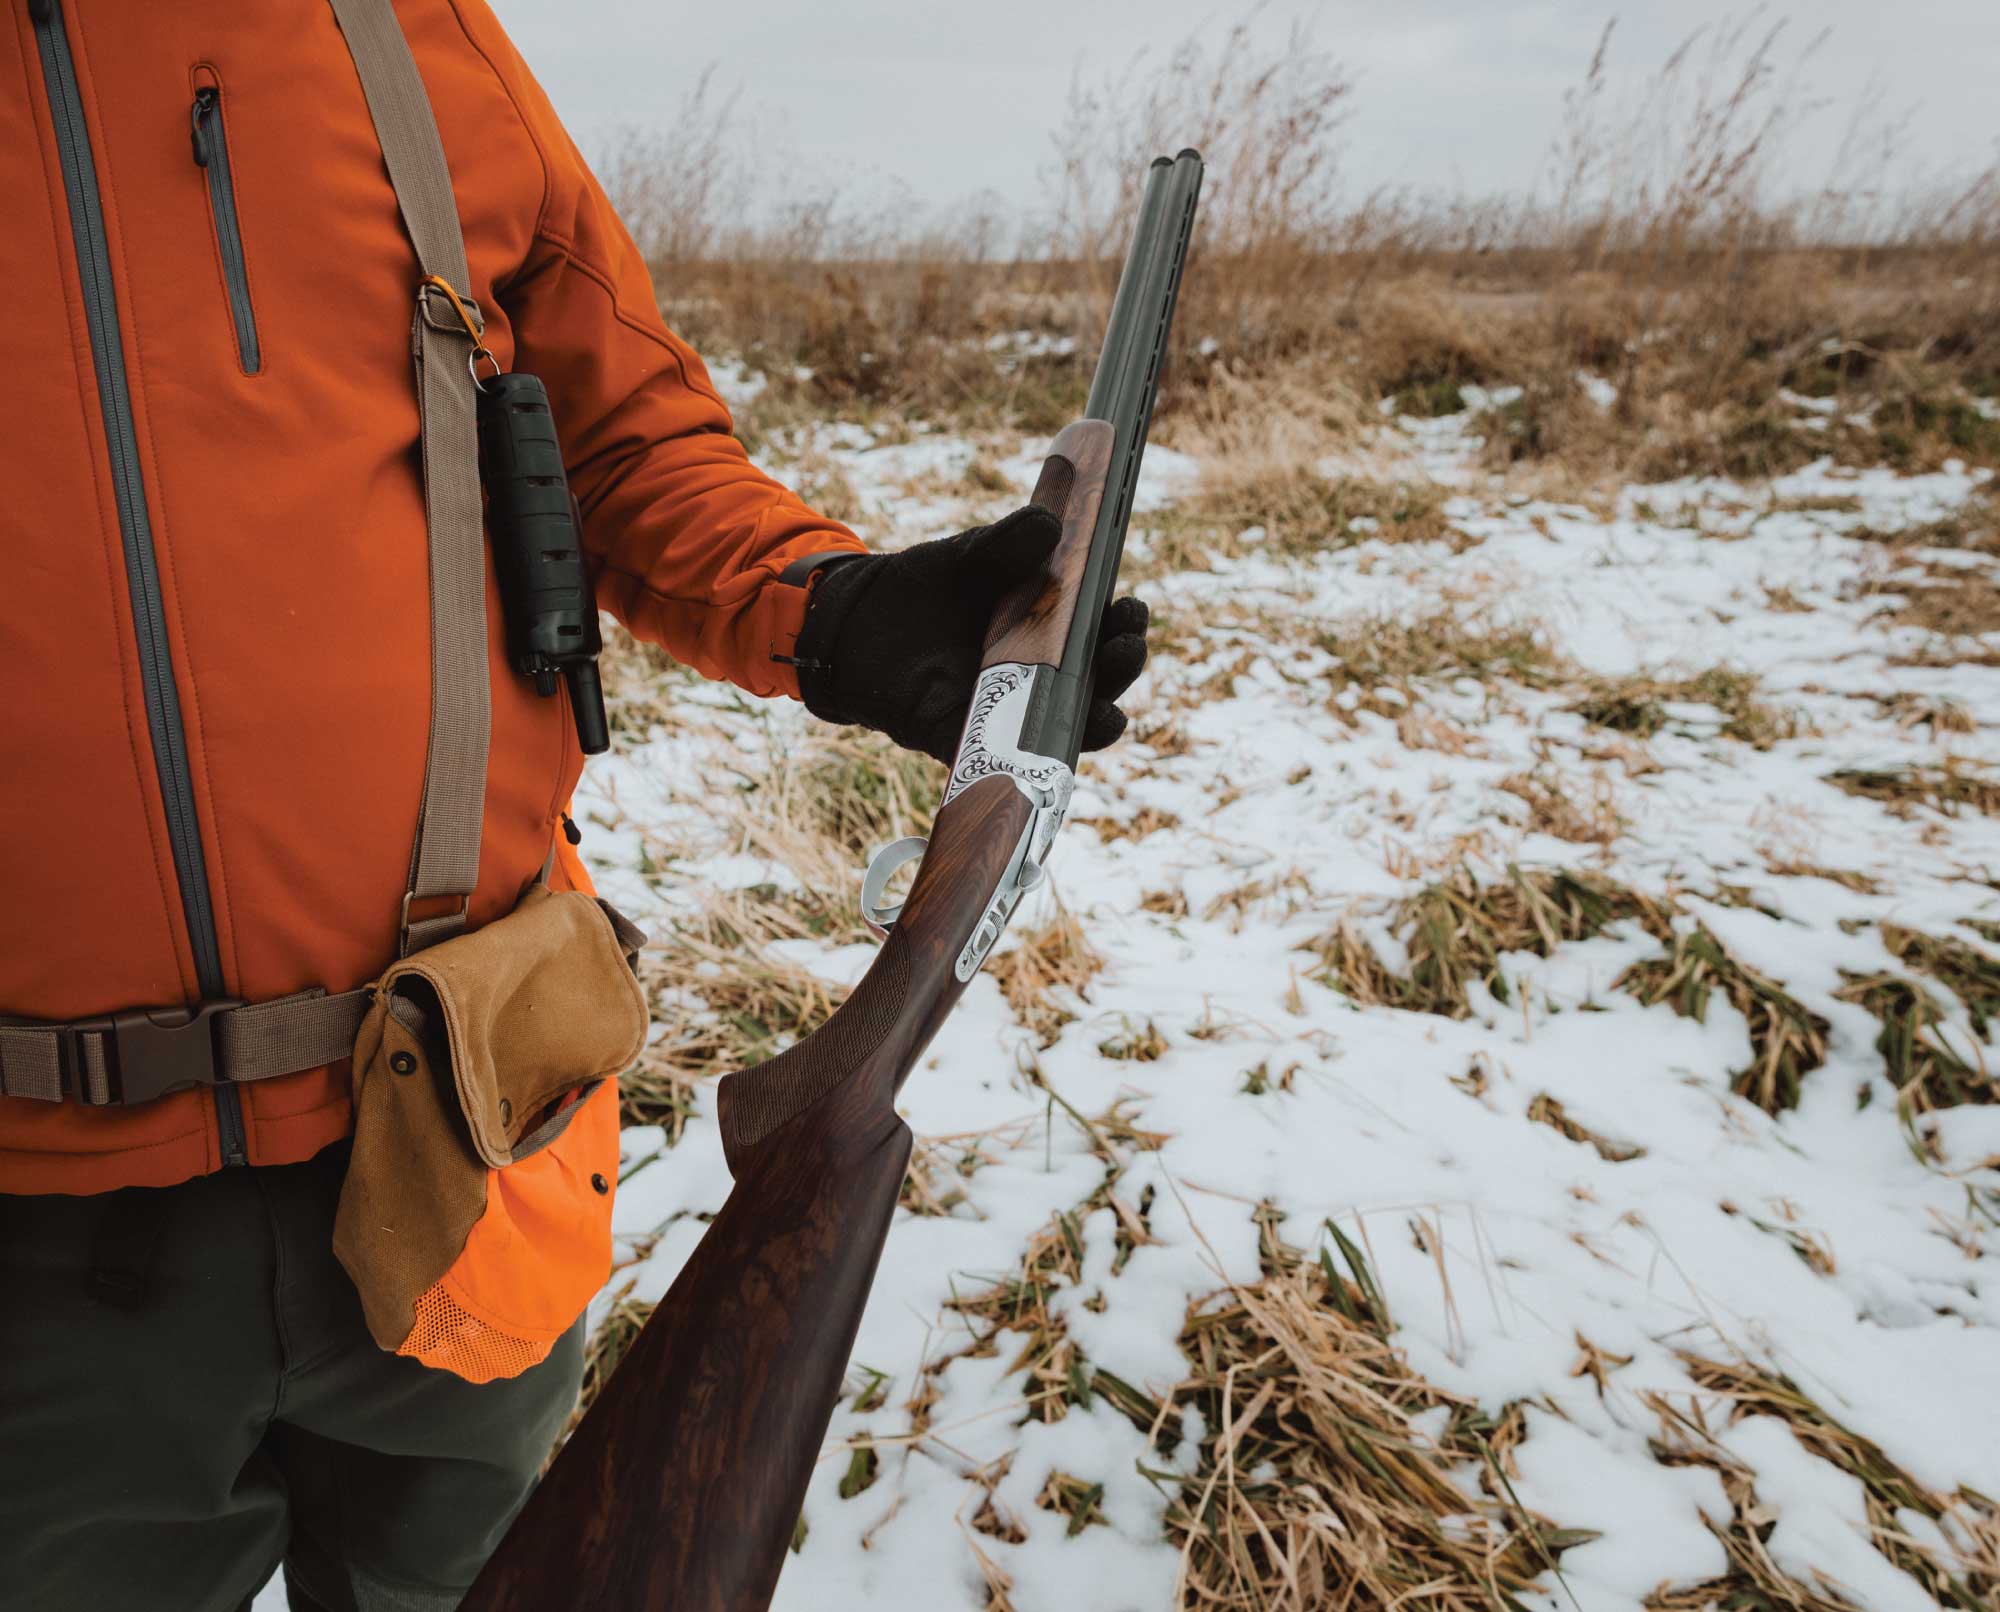 How Many Guns Should a Hunter Have? Finding the Right Number.